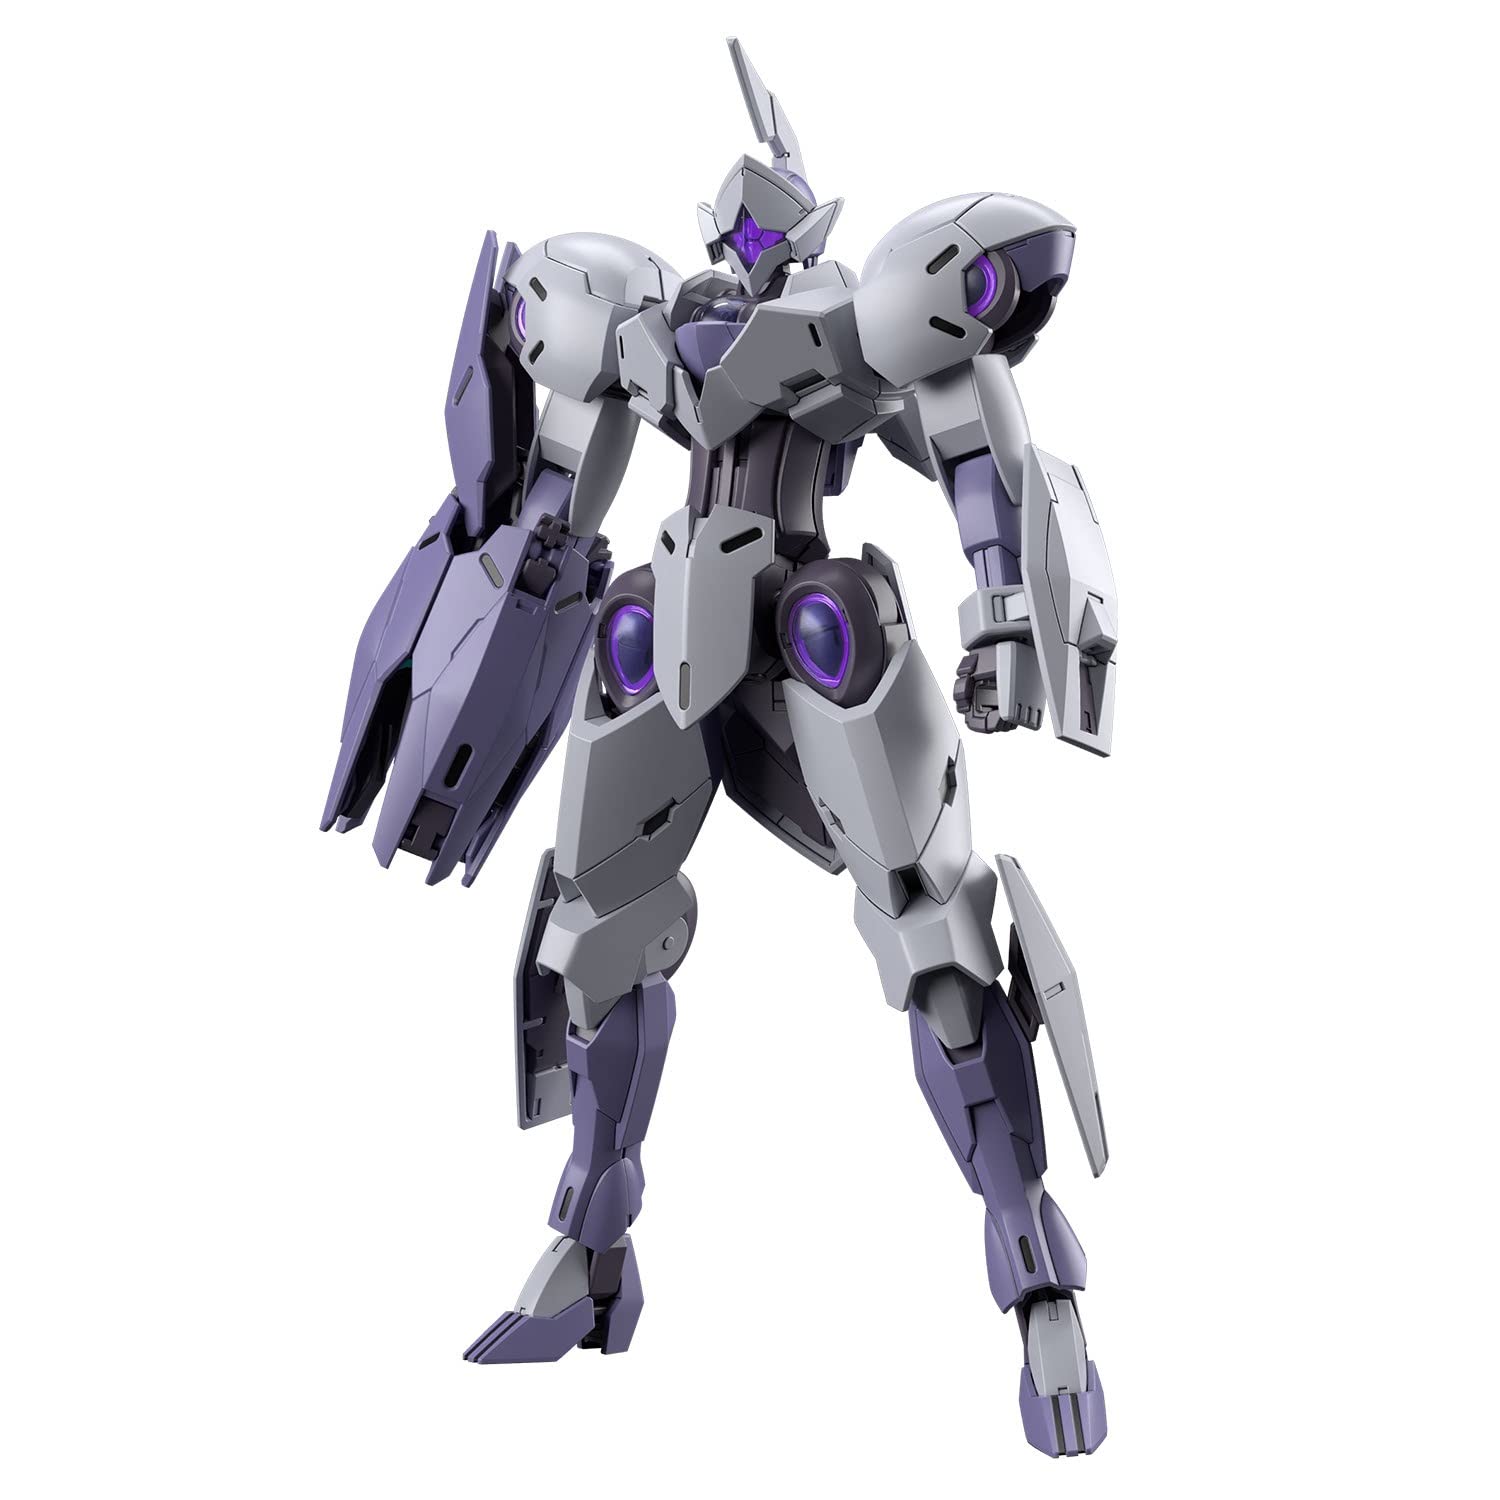 BANDAI SPIRITS HG Mobile Suit Gundam Witch of Mercury Michaelis 1/144 scale color-coded plastic model - BanzaiHobby